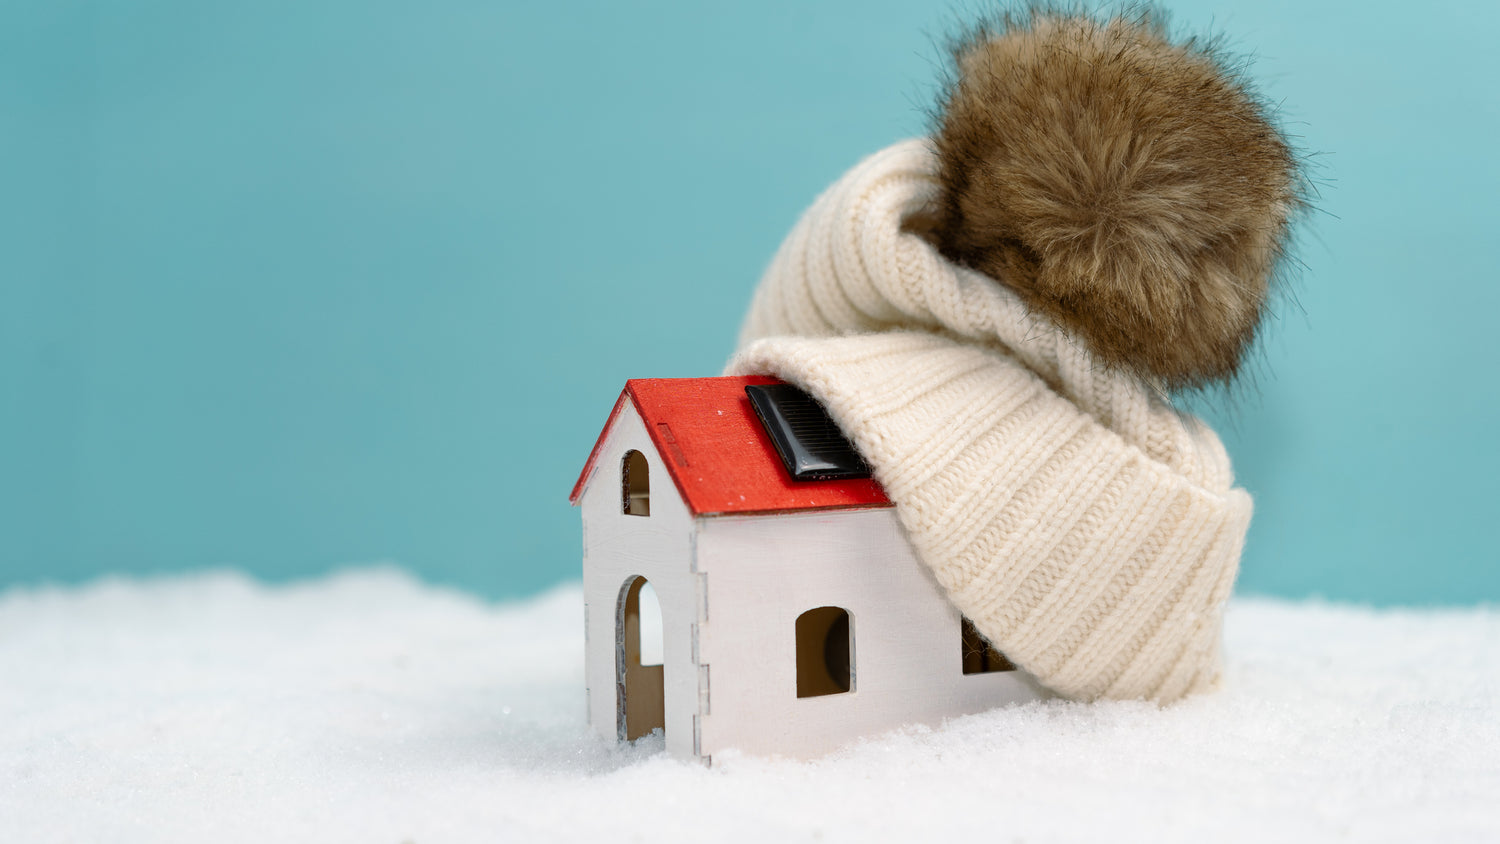 How To Winterize a House: Essential Tips for a Cozy and Energy-Efficient Winter Season